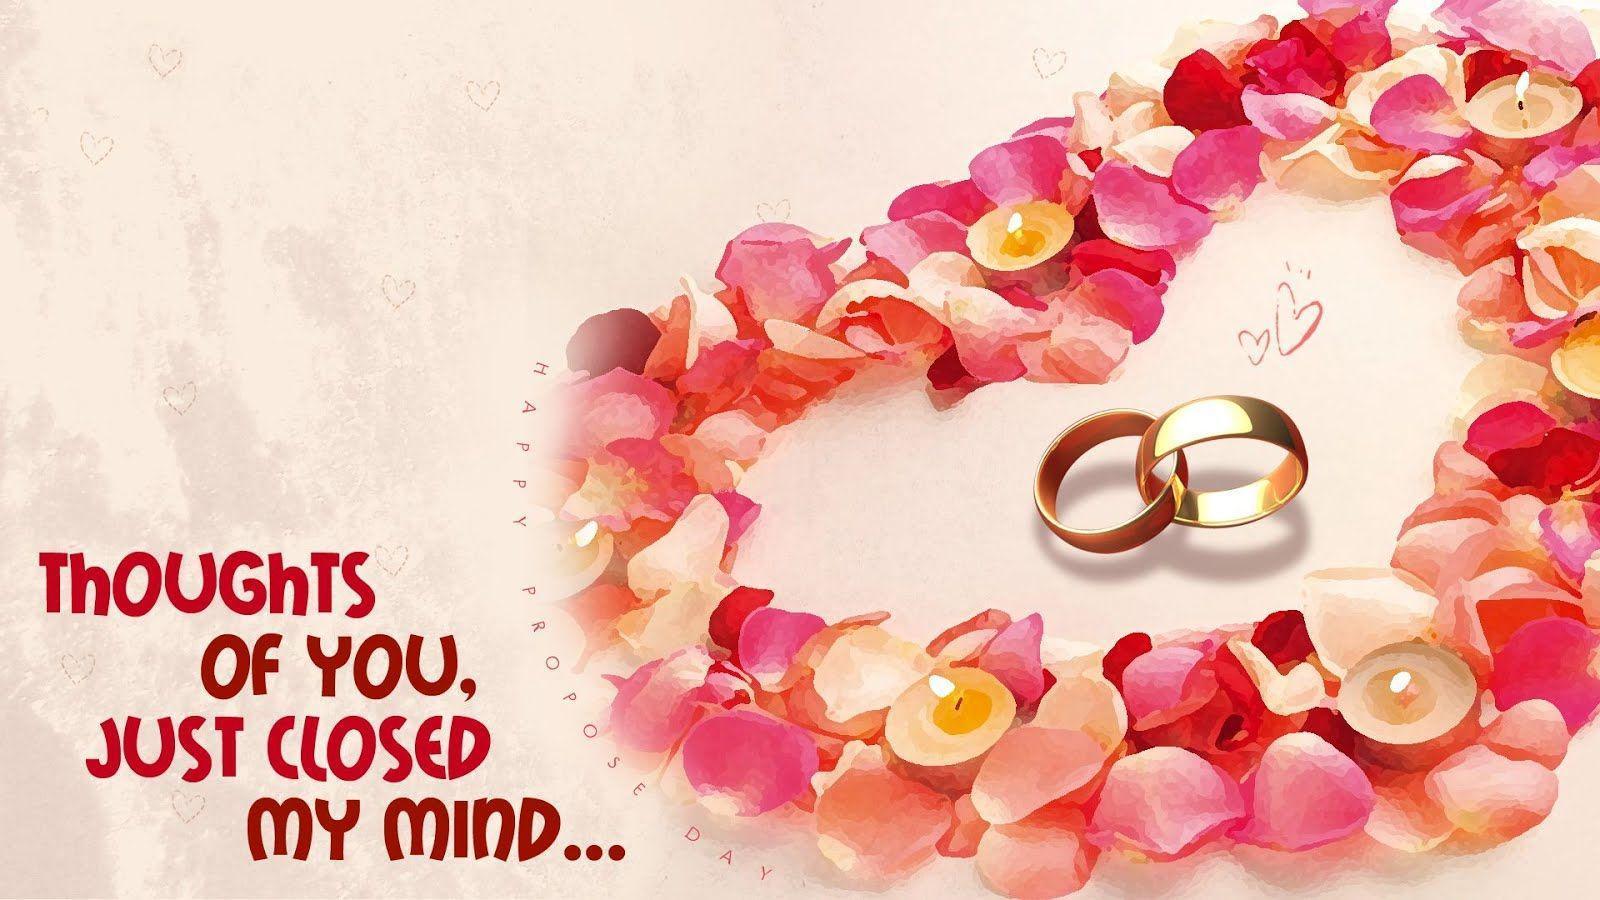 Propose Day Wallpaper Download Gallery in HD Download HD